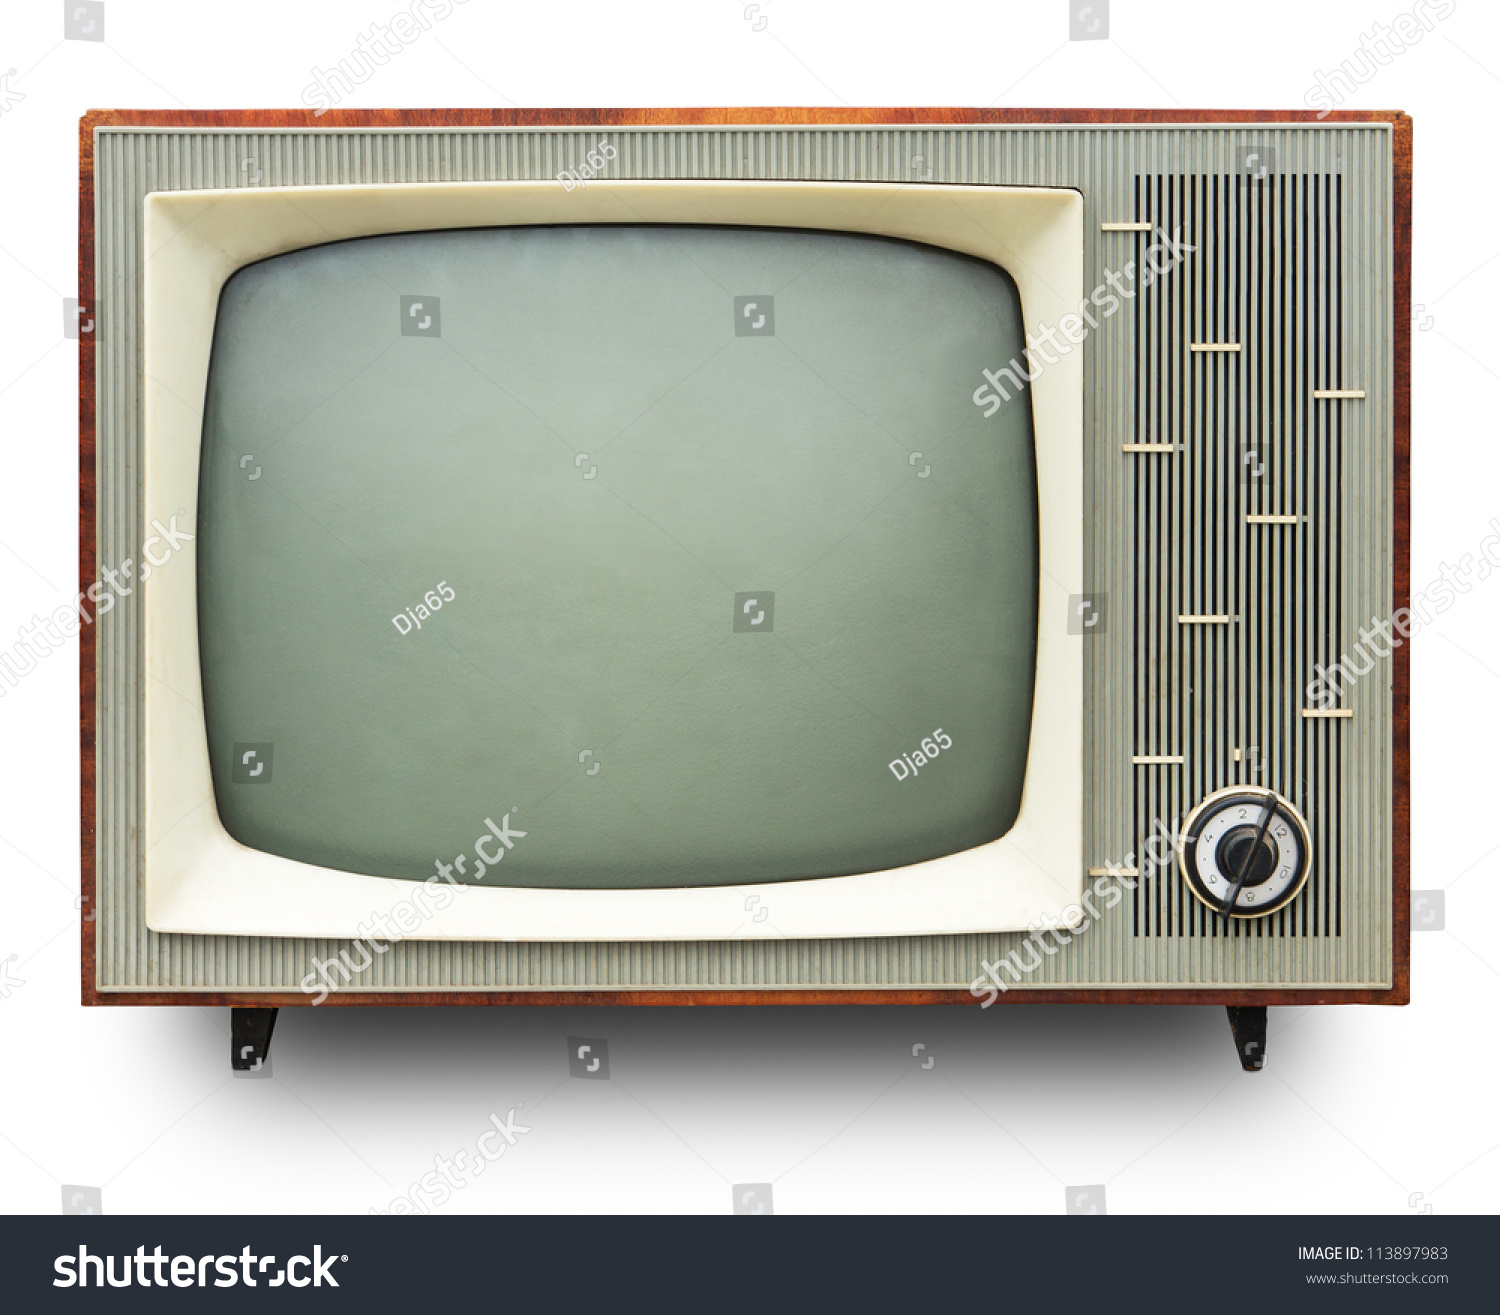 Vintage TV set isolated. Clipping path included. #113897983